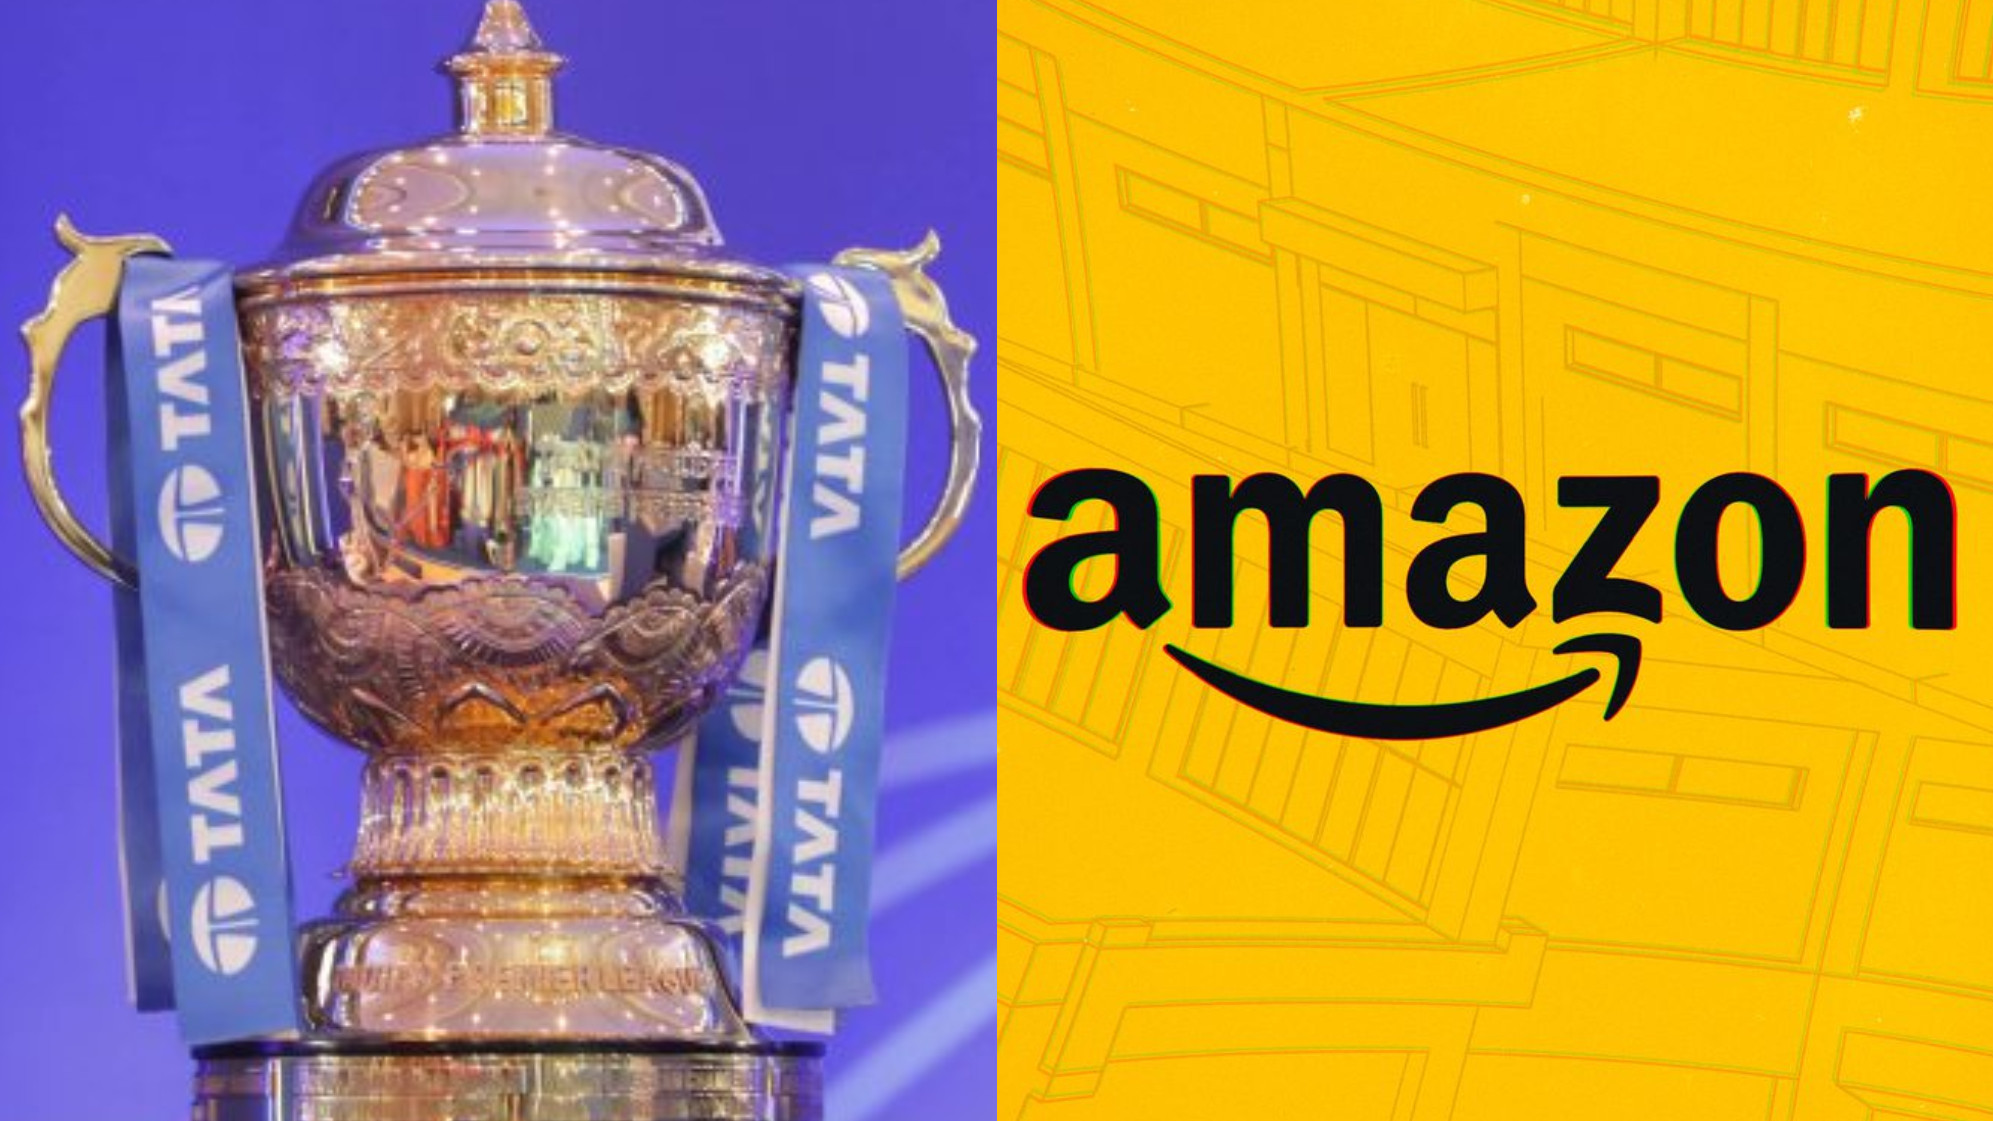 Amazon pulls out of bidding for IPL media rights- Report